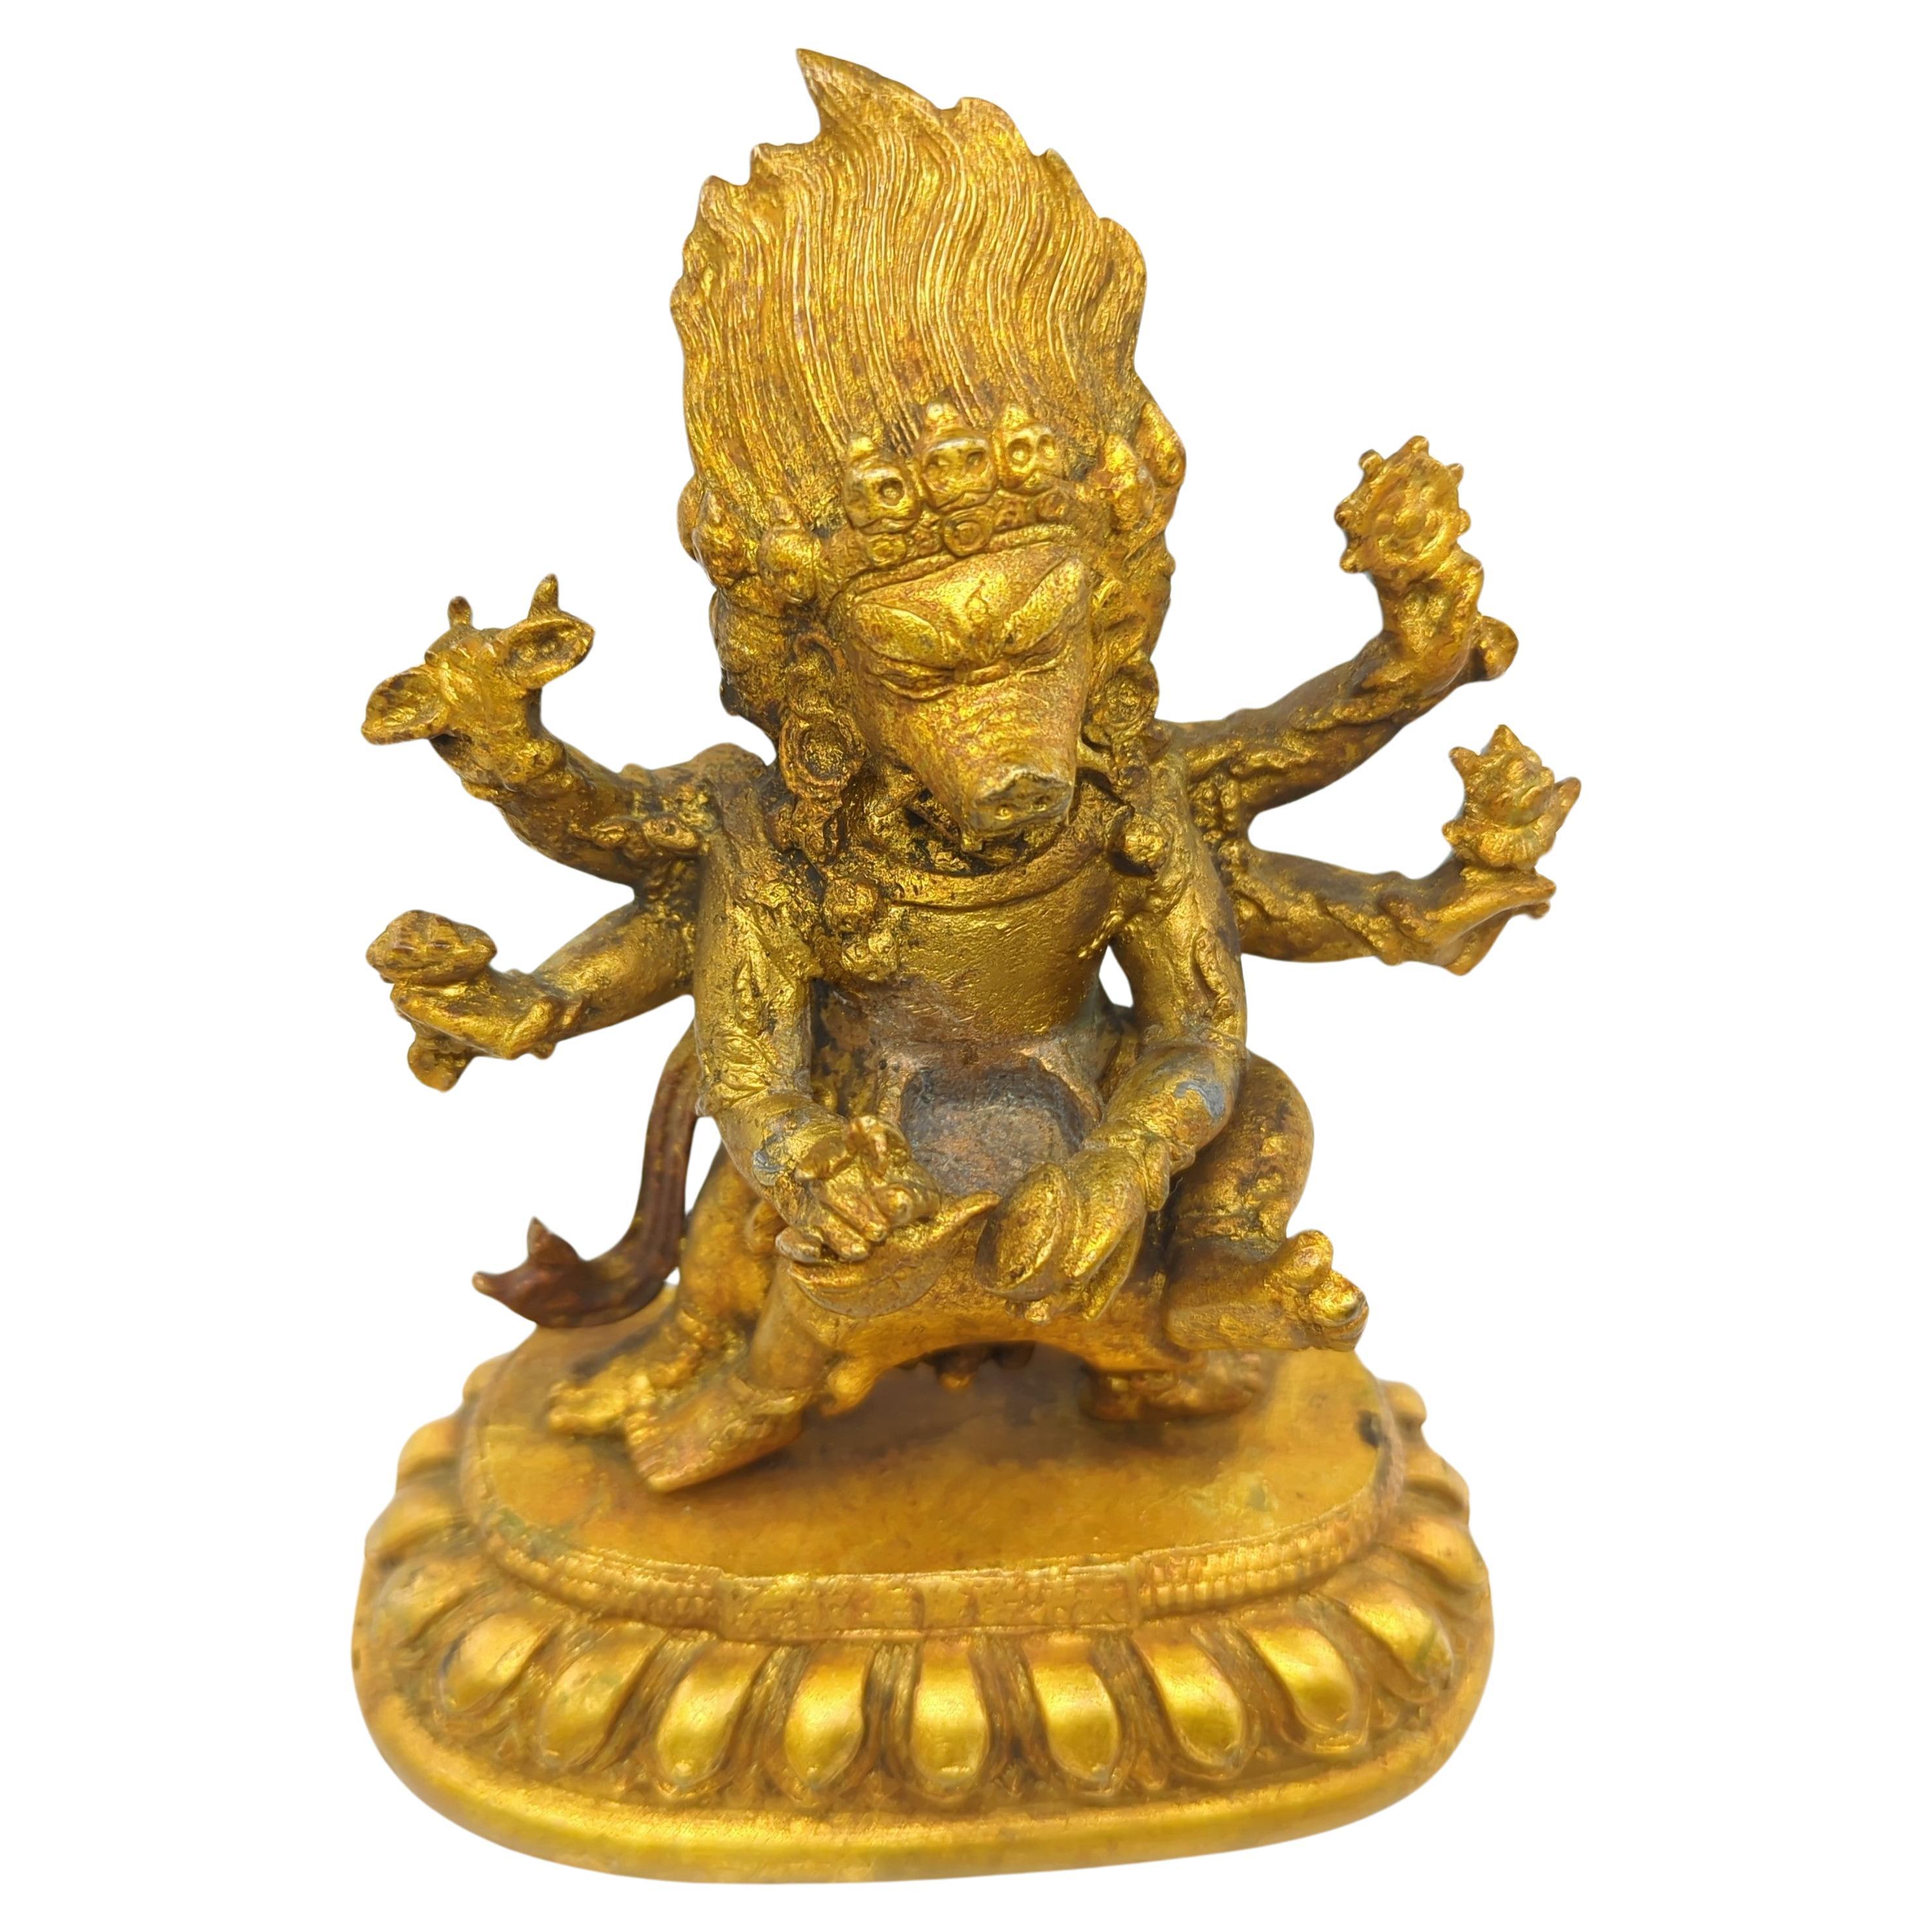 This antique Chinese bronze statue represents Marici, a revered figure in Buddhist mythology. Crafted from bronze, a material known for its durability and historical significance in Chinese art, the statue captures the essence of Marici's symbolic